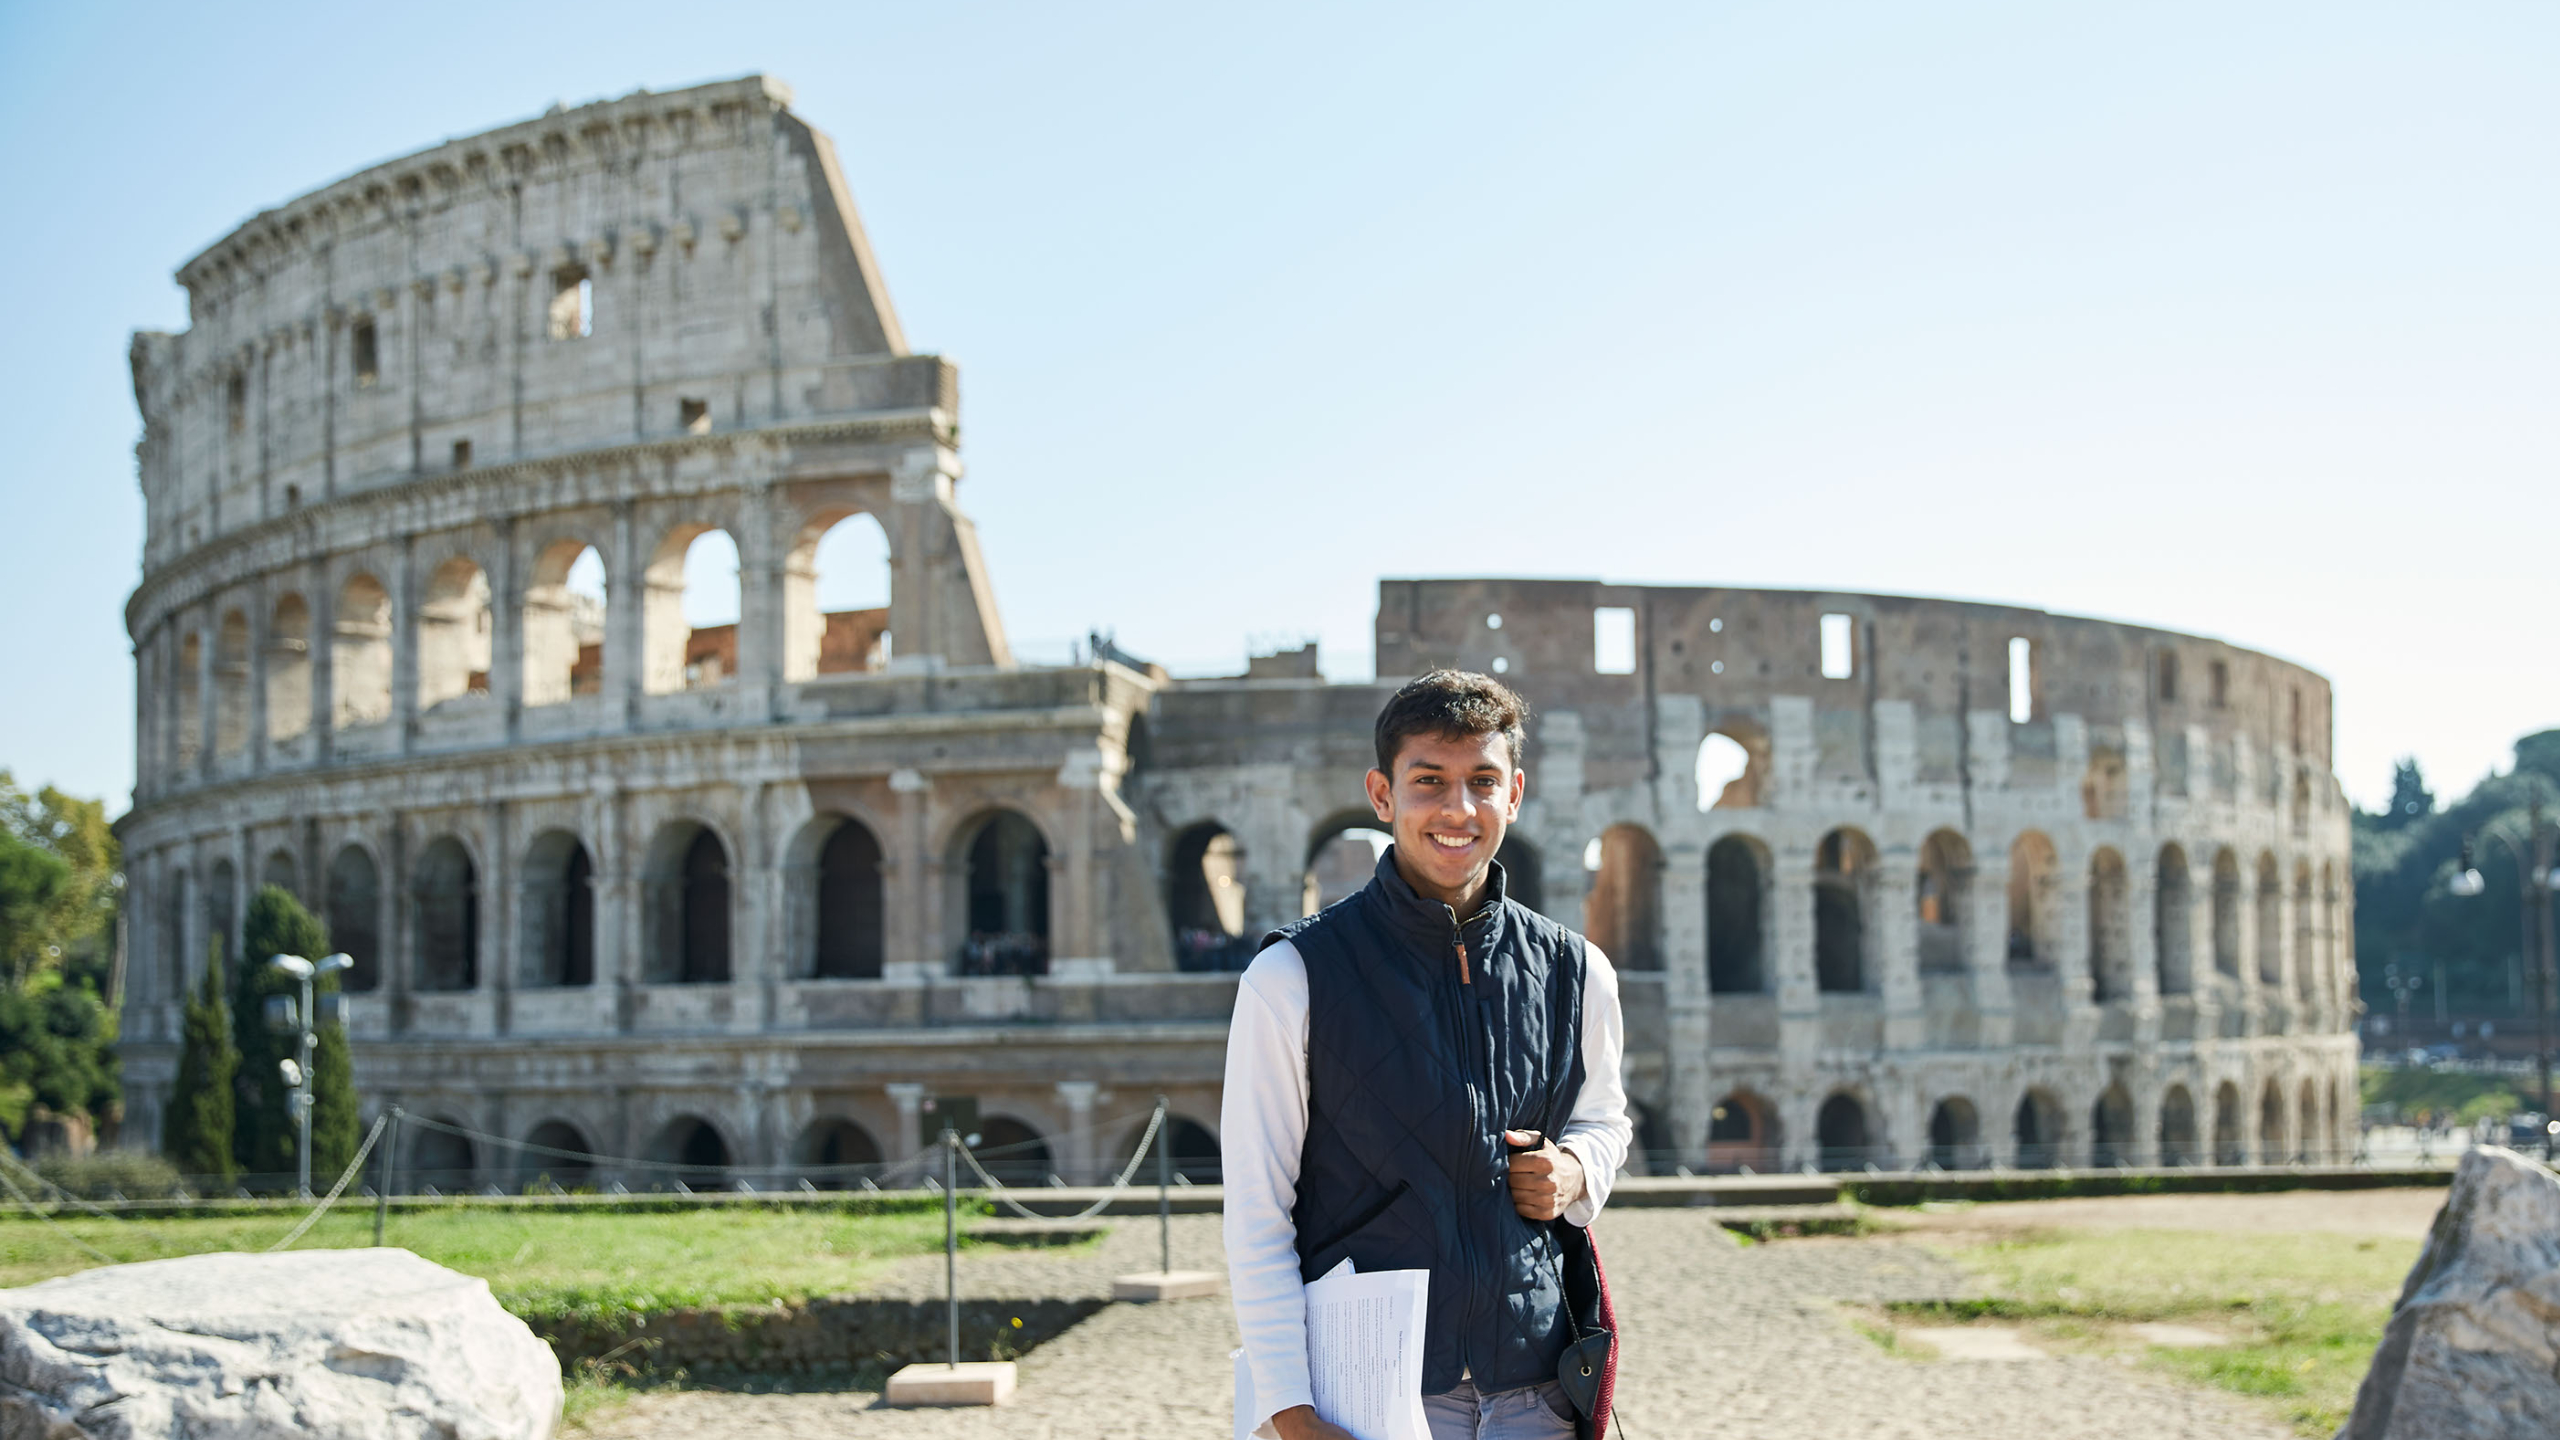 Study abroad student standing in front of the colloseum in Rome